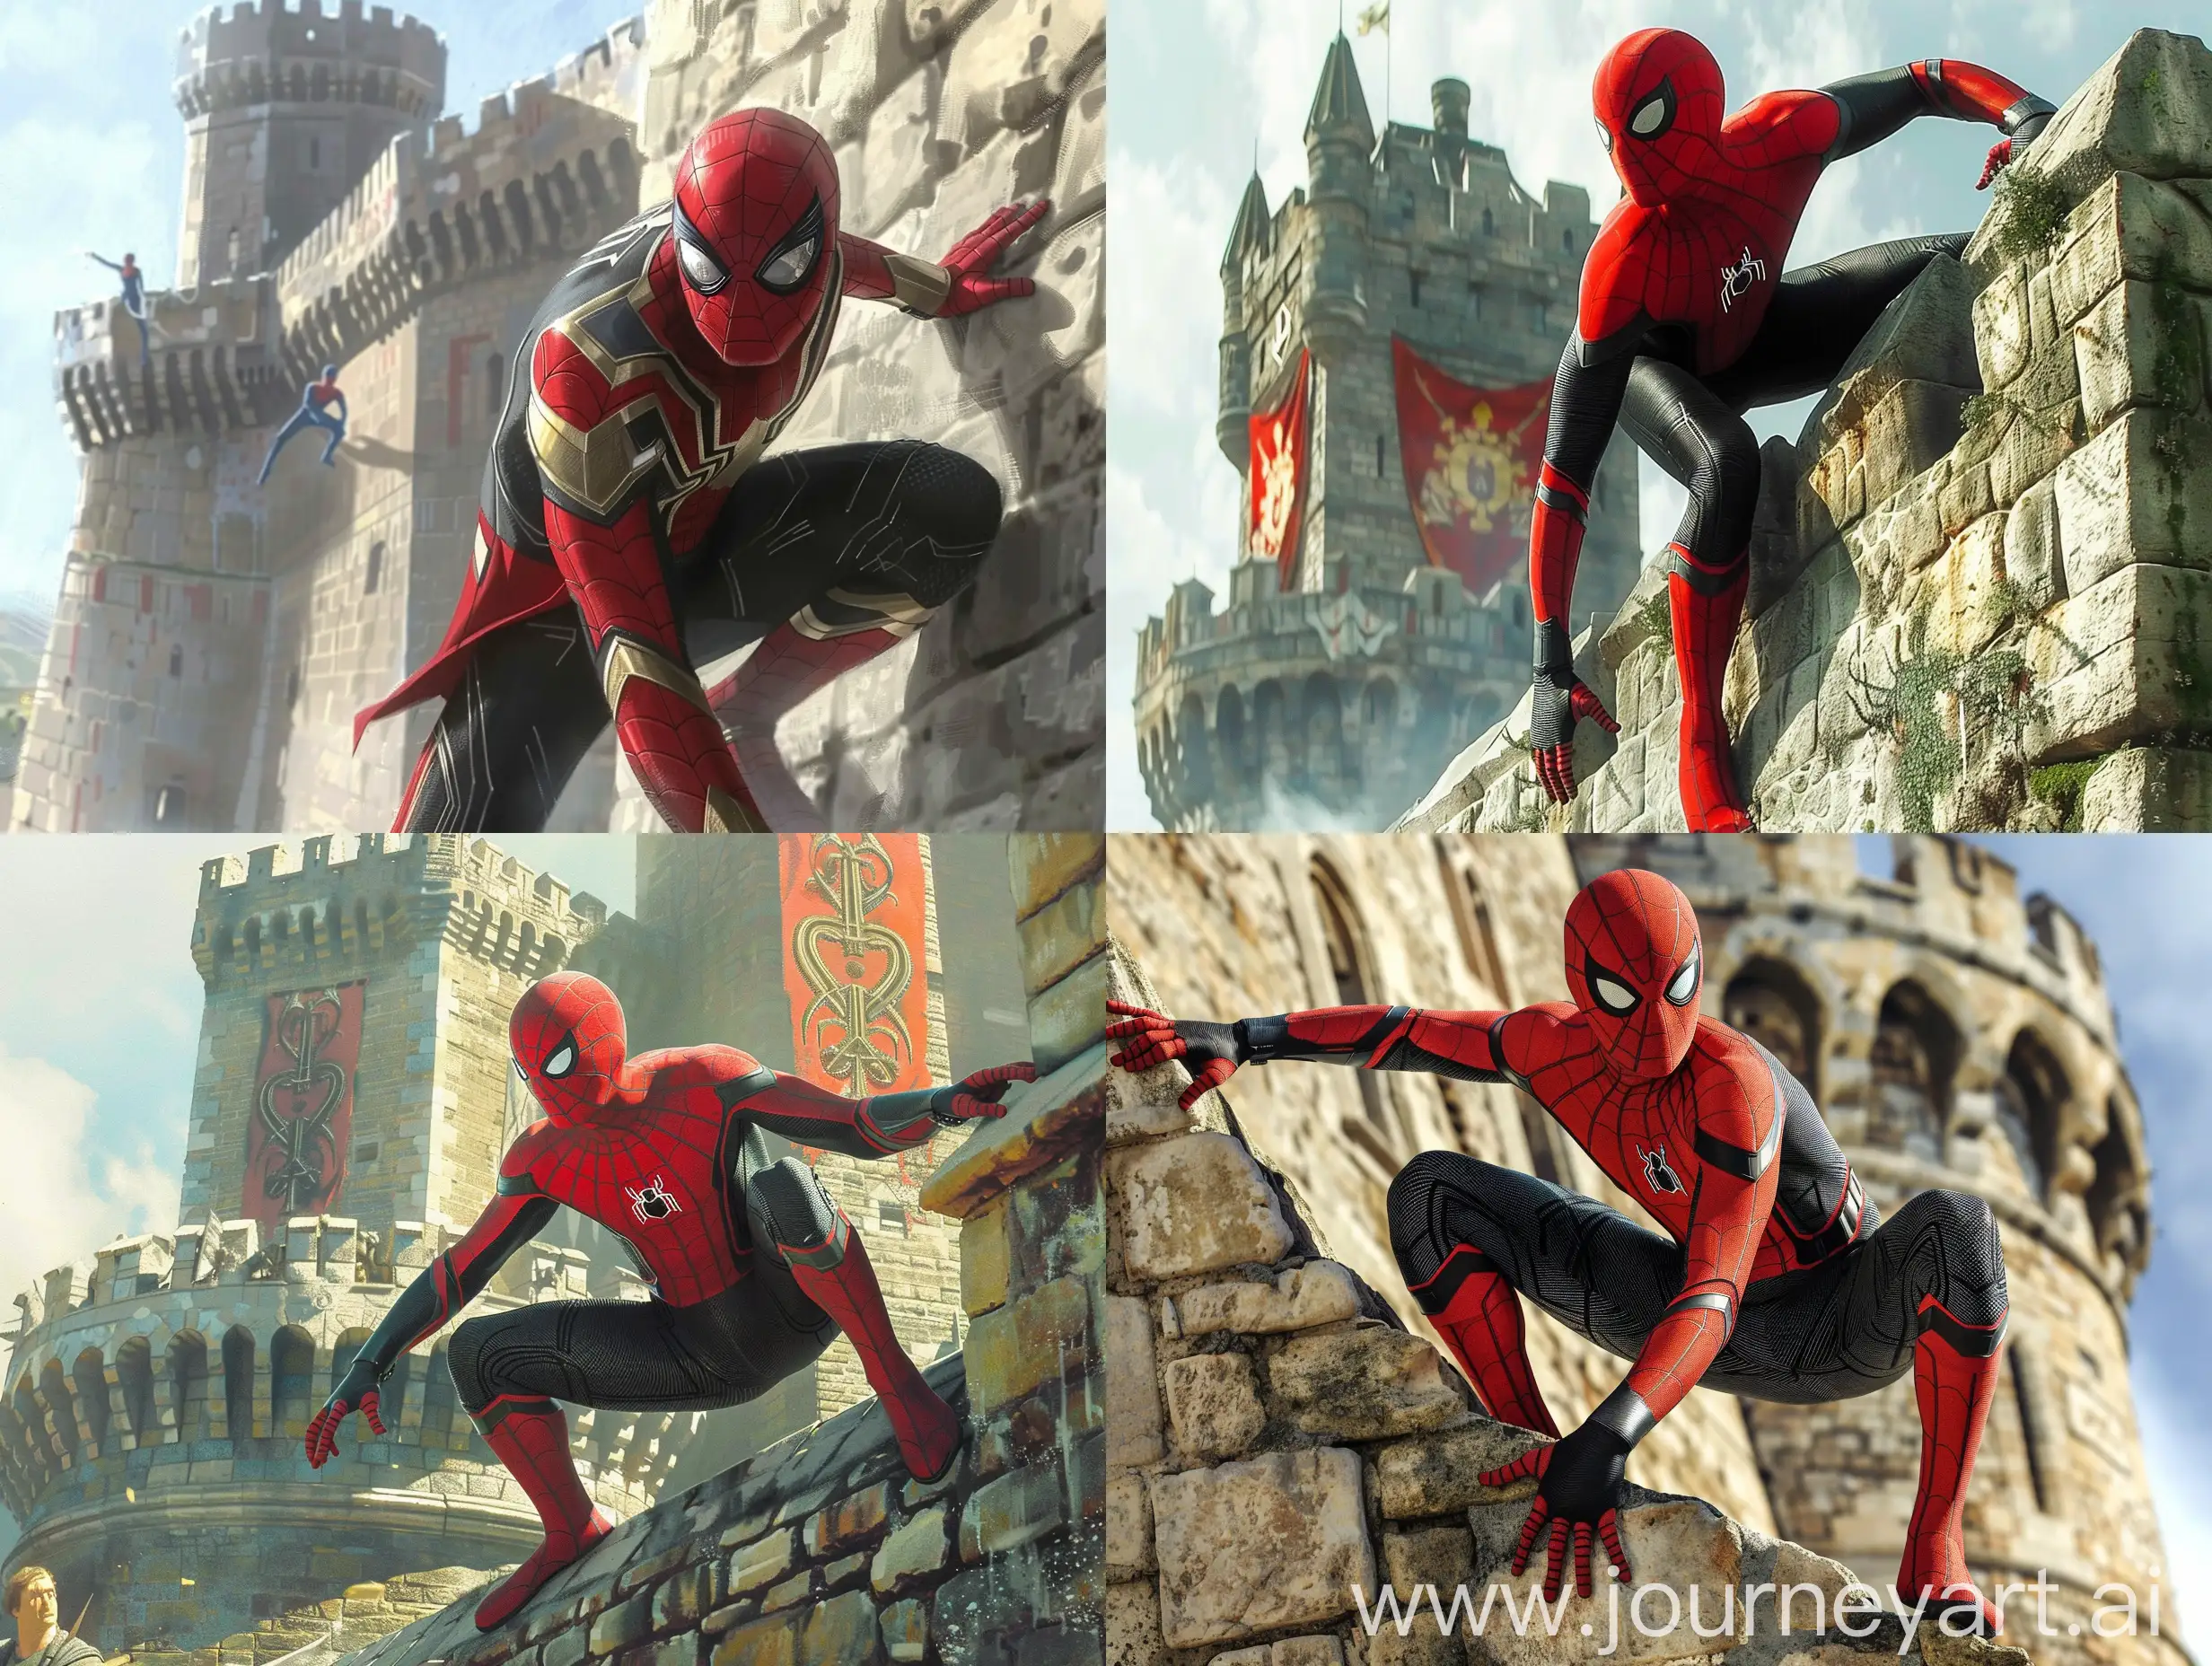 Camelot Palace in the 16th century, Spider-Man is wearing the military uniform of the soldiers of the Sibyl Wars in the 15th century, Spider-Man wearing the same military uniform is climbing the wall of the Camelot Palace. The image is very clear, very realistic, q2